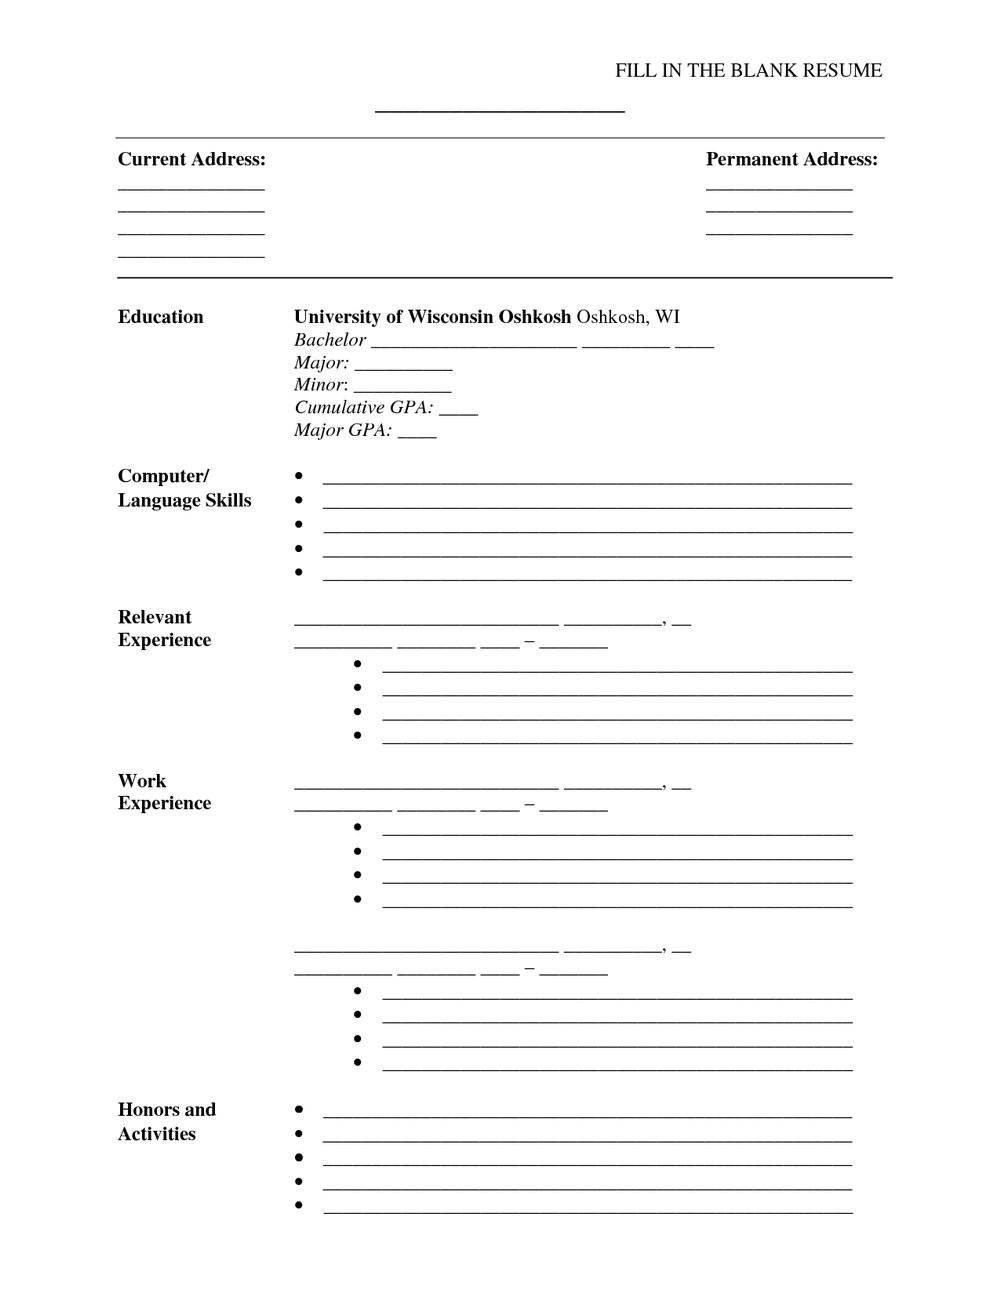 fill in the blank resume template for highschool students